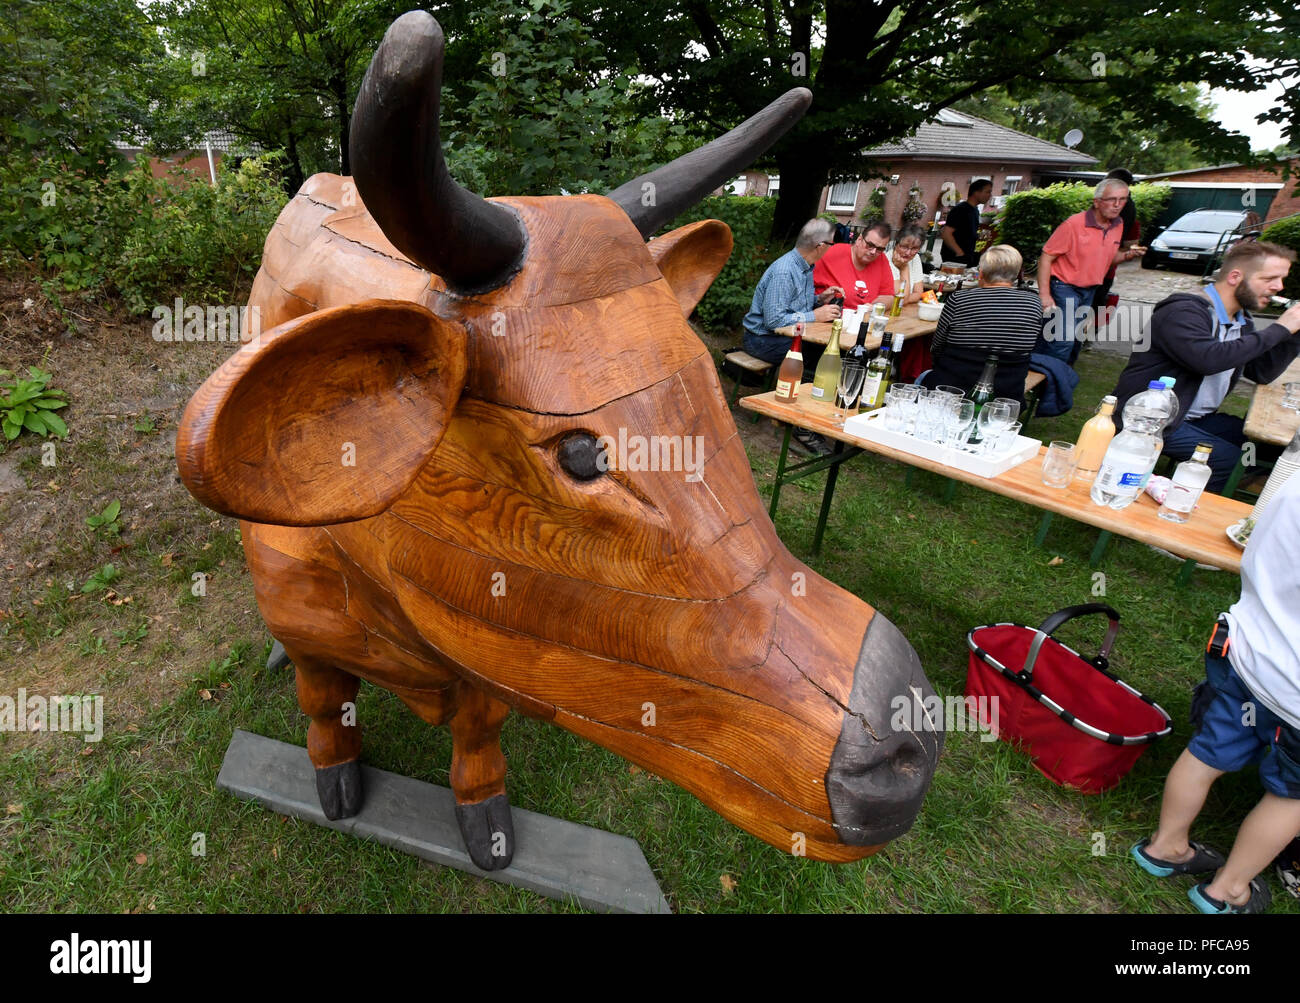 Aukrug-Homfeld, Germany. 19th Aug, 2018. The wooden cow 'Gerda Muh' stands in front of visitors of a neighbourhood meeting. An anonymous artist created the wooden cow, since Whitsun it has appeared in changing gardens in the district of Homfeld. With this event, the initiator wants to stimulate the discussion about agriculture and the community feeling of the villagers. Credit: Carsten Rehder/dpa/Alamy Live News Stock Photo